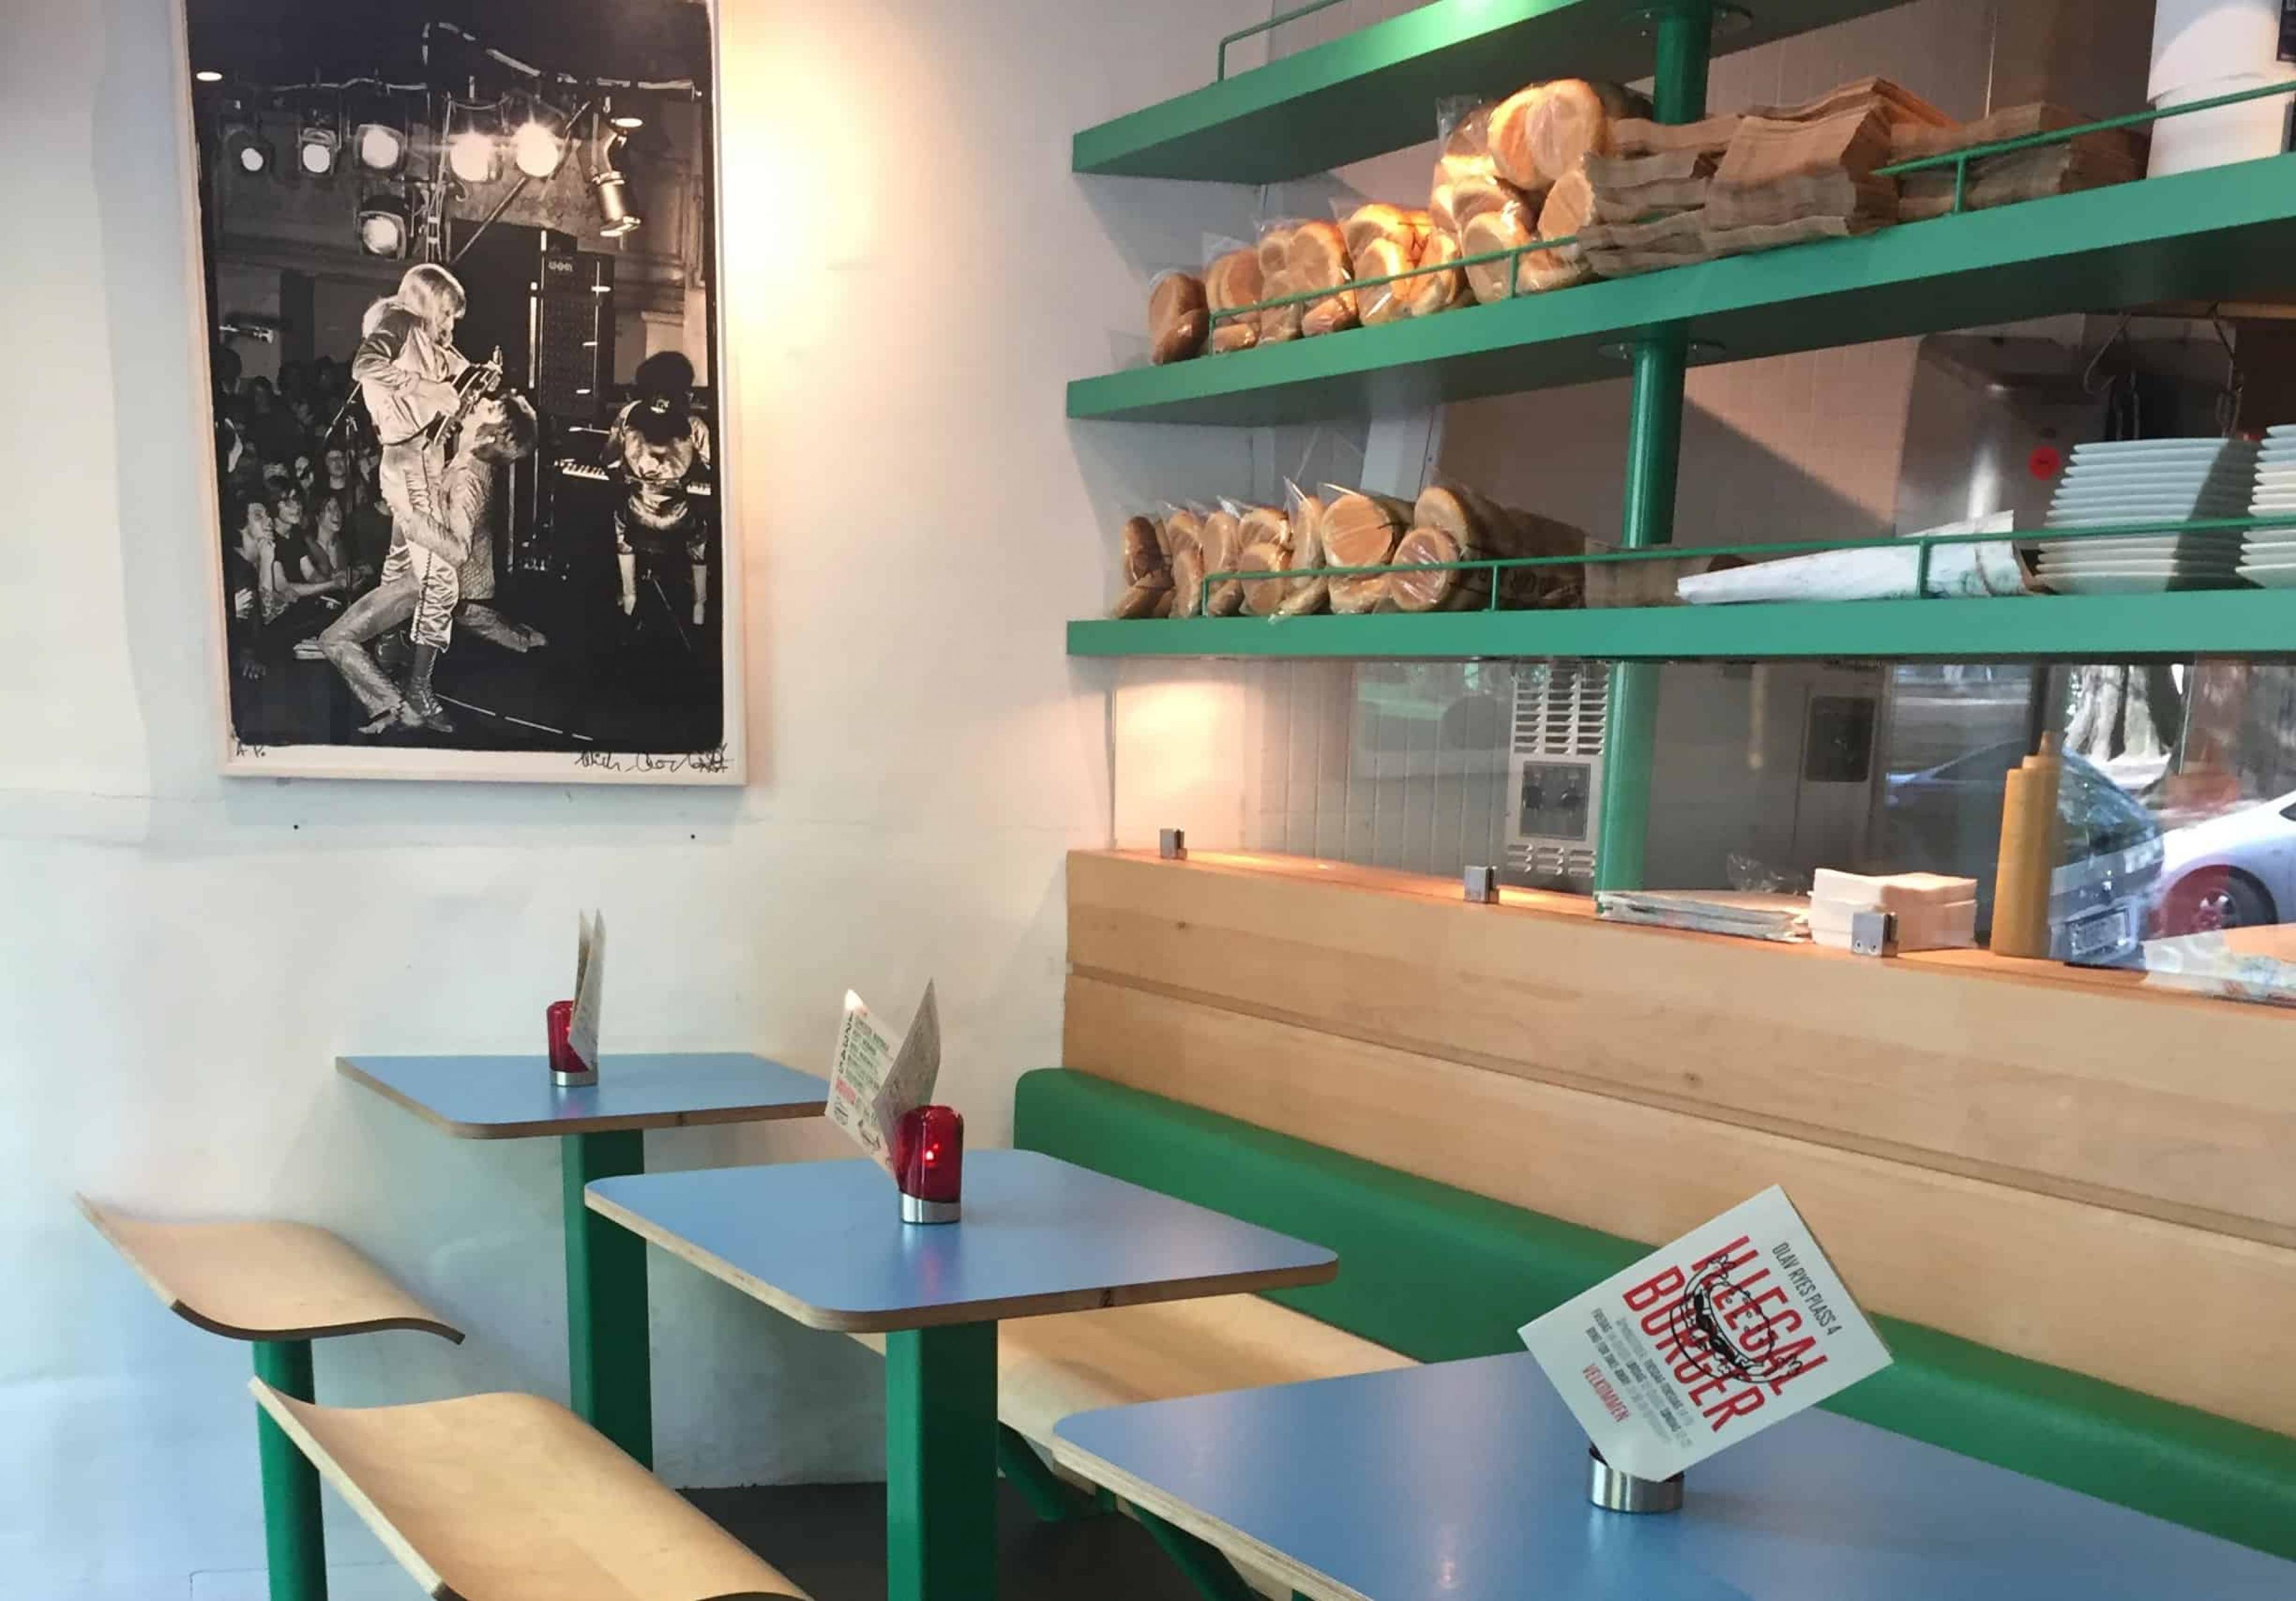 Dinning Area at Illegal Burger, Oslo, Norway